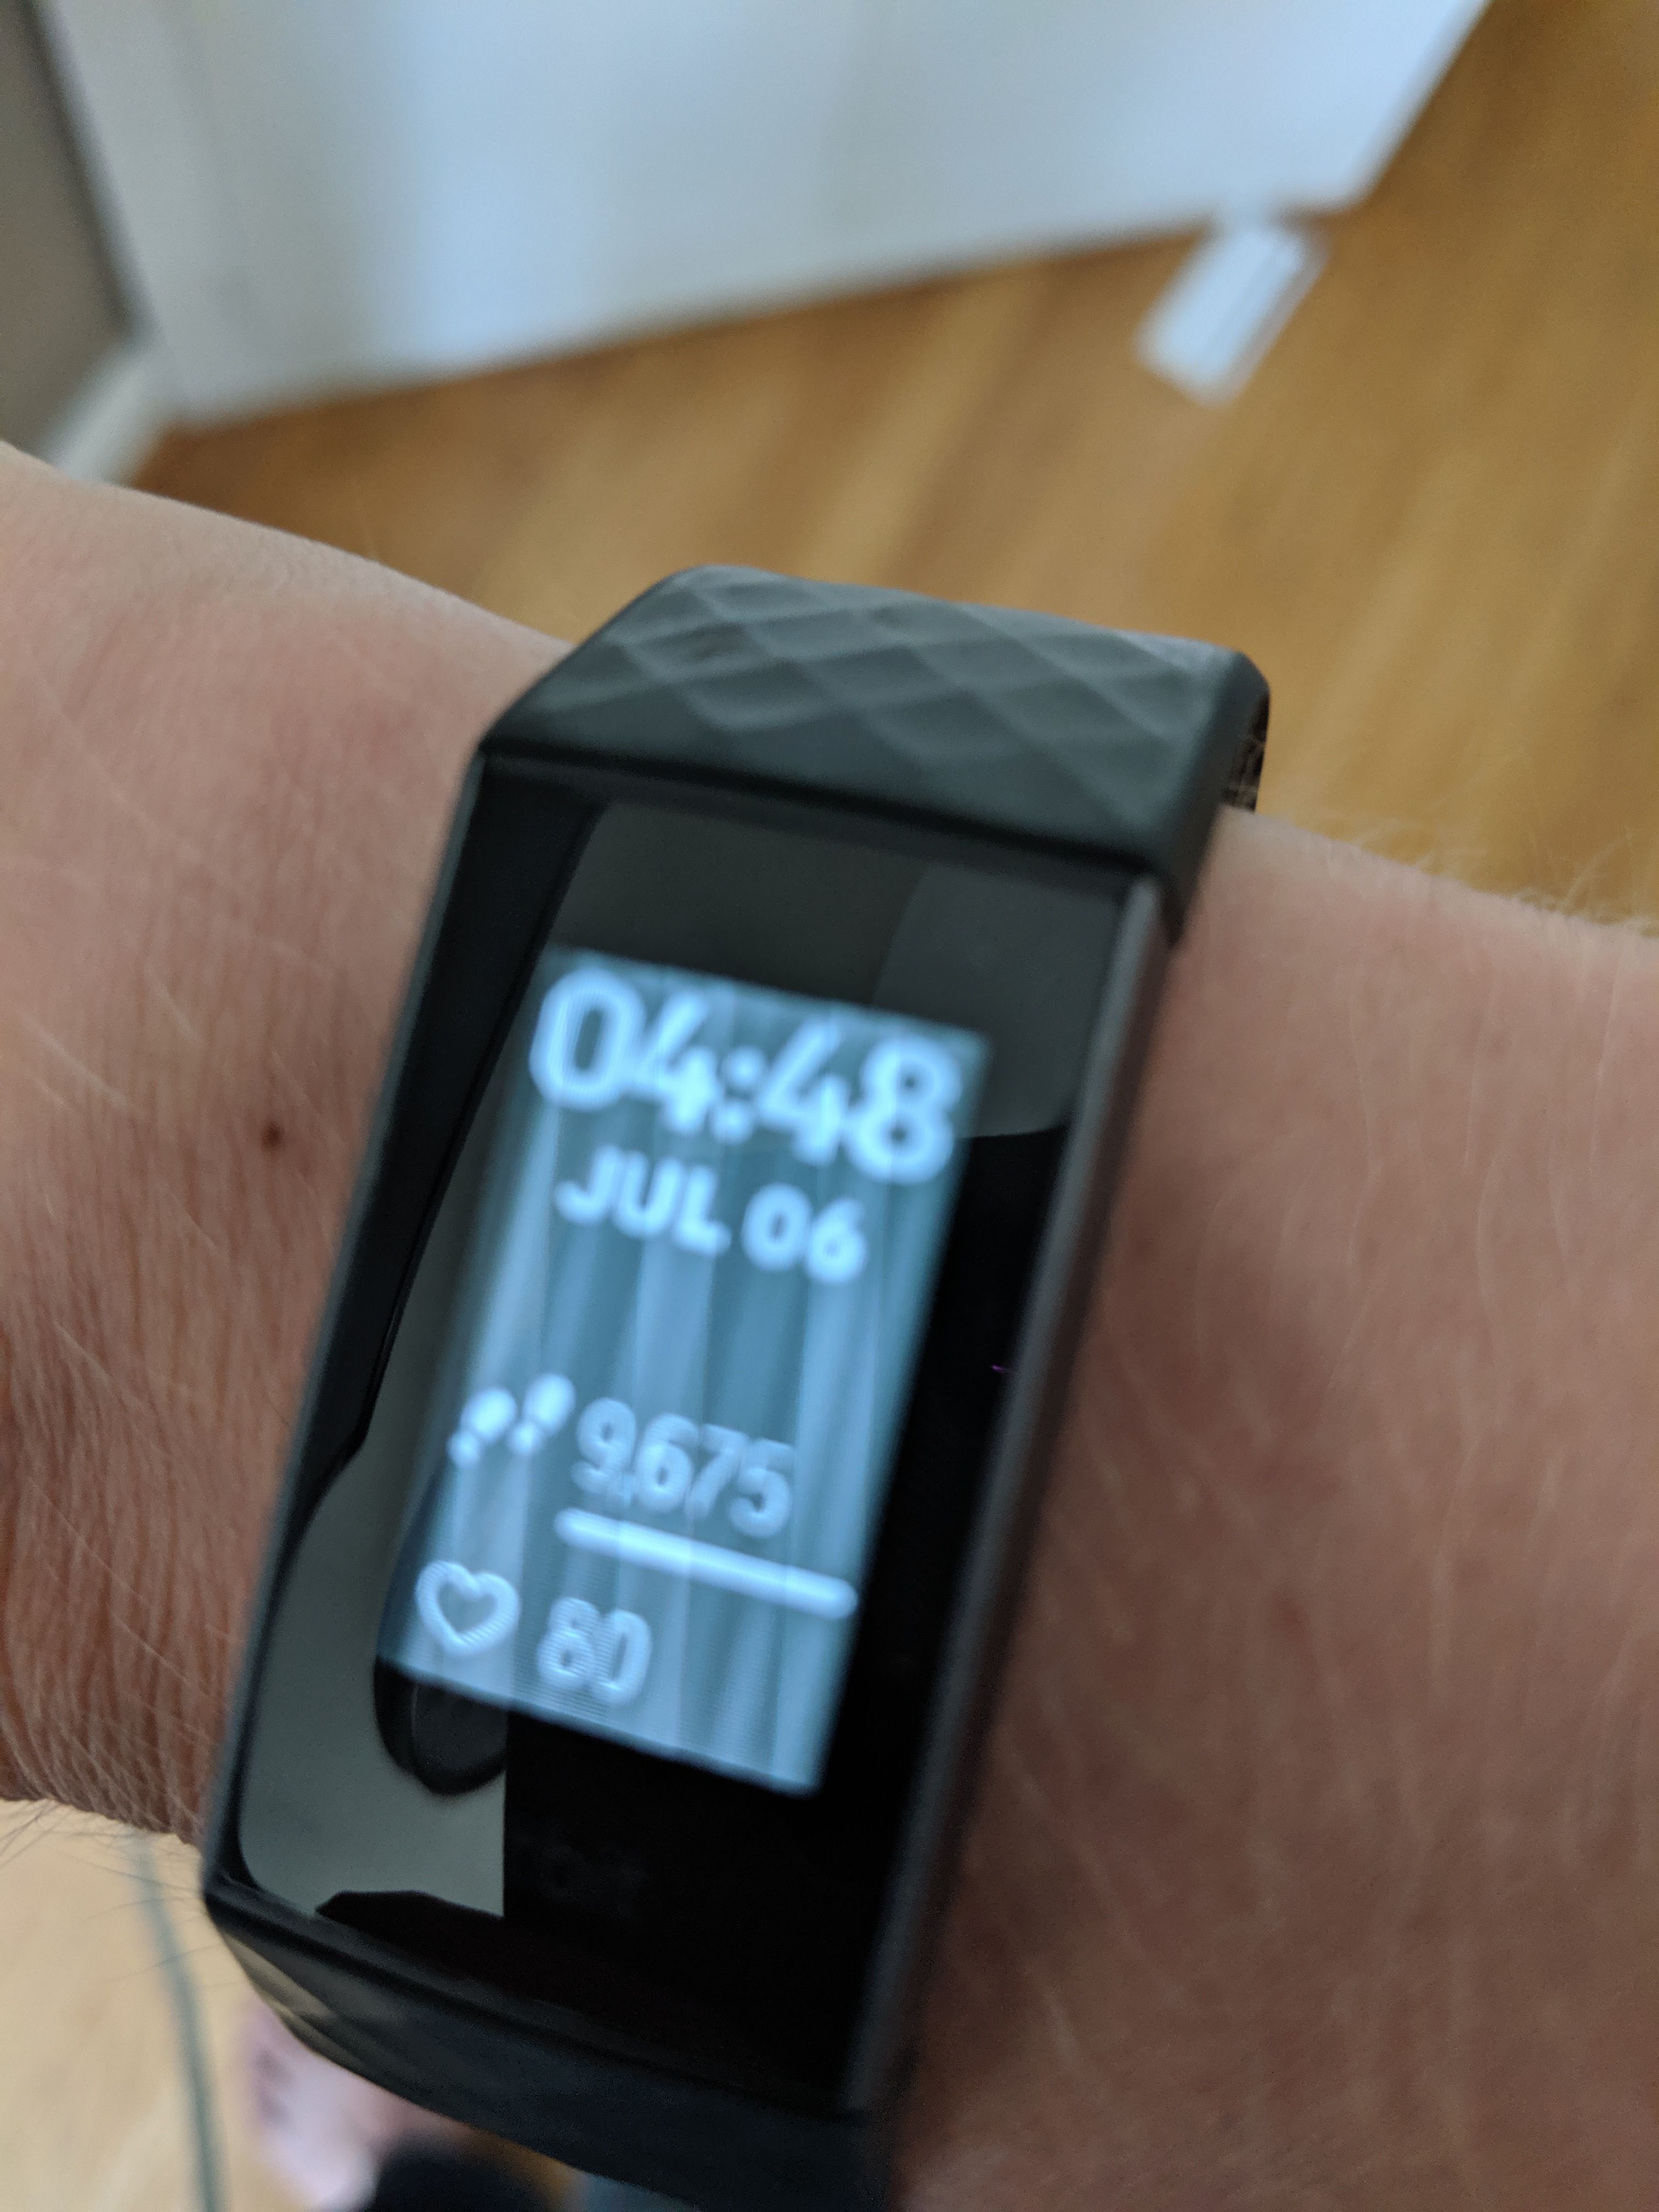 fitbit charge 3 screen is blank